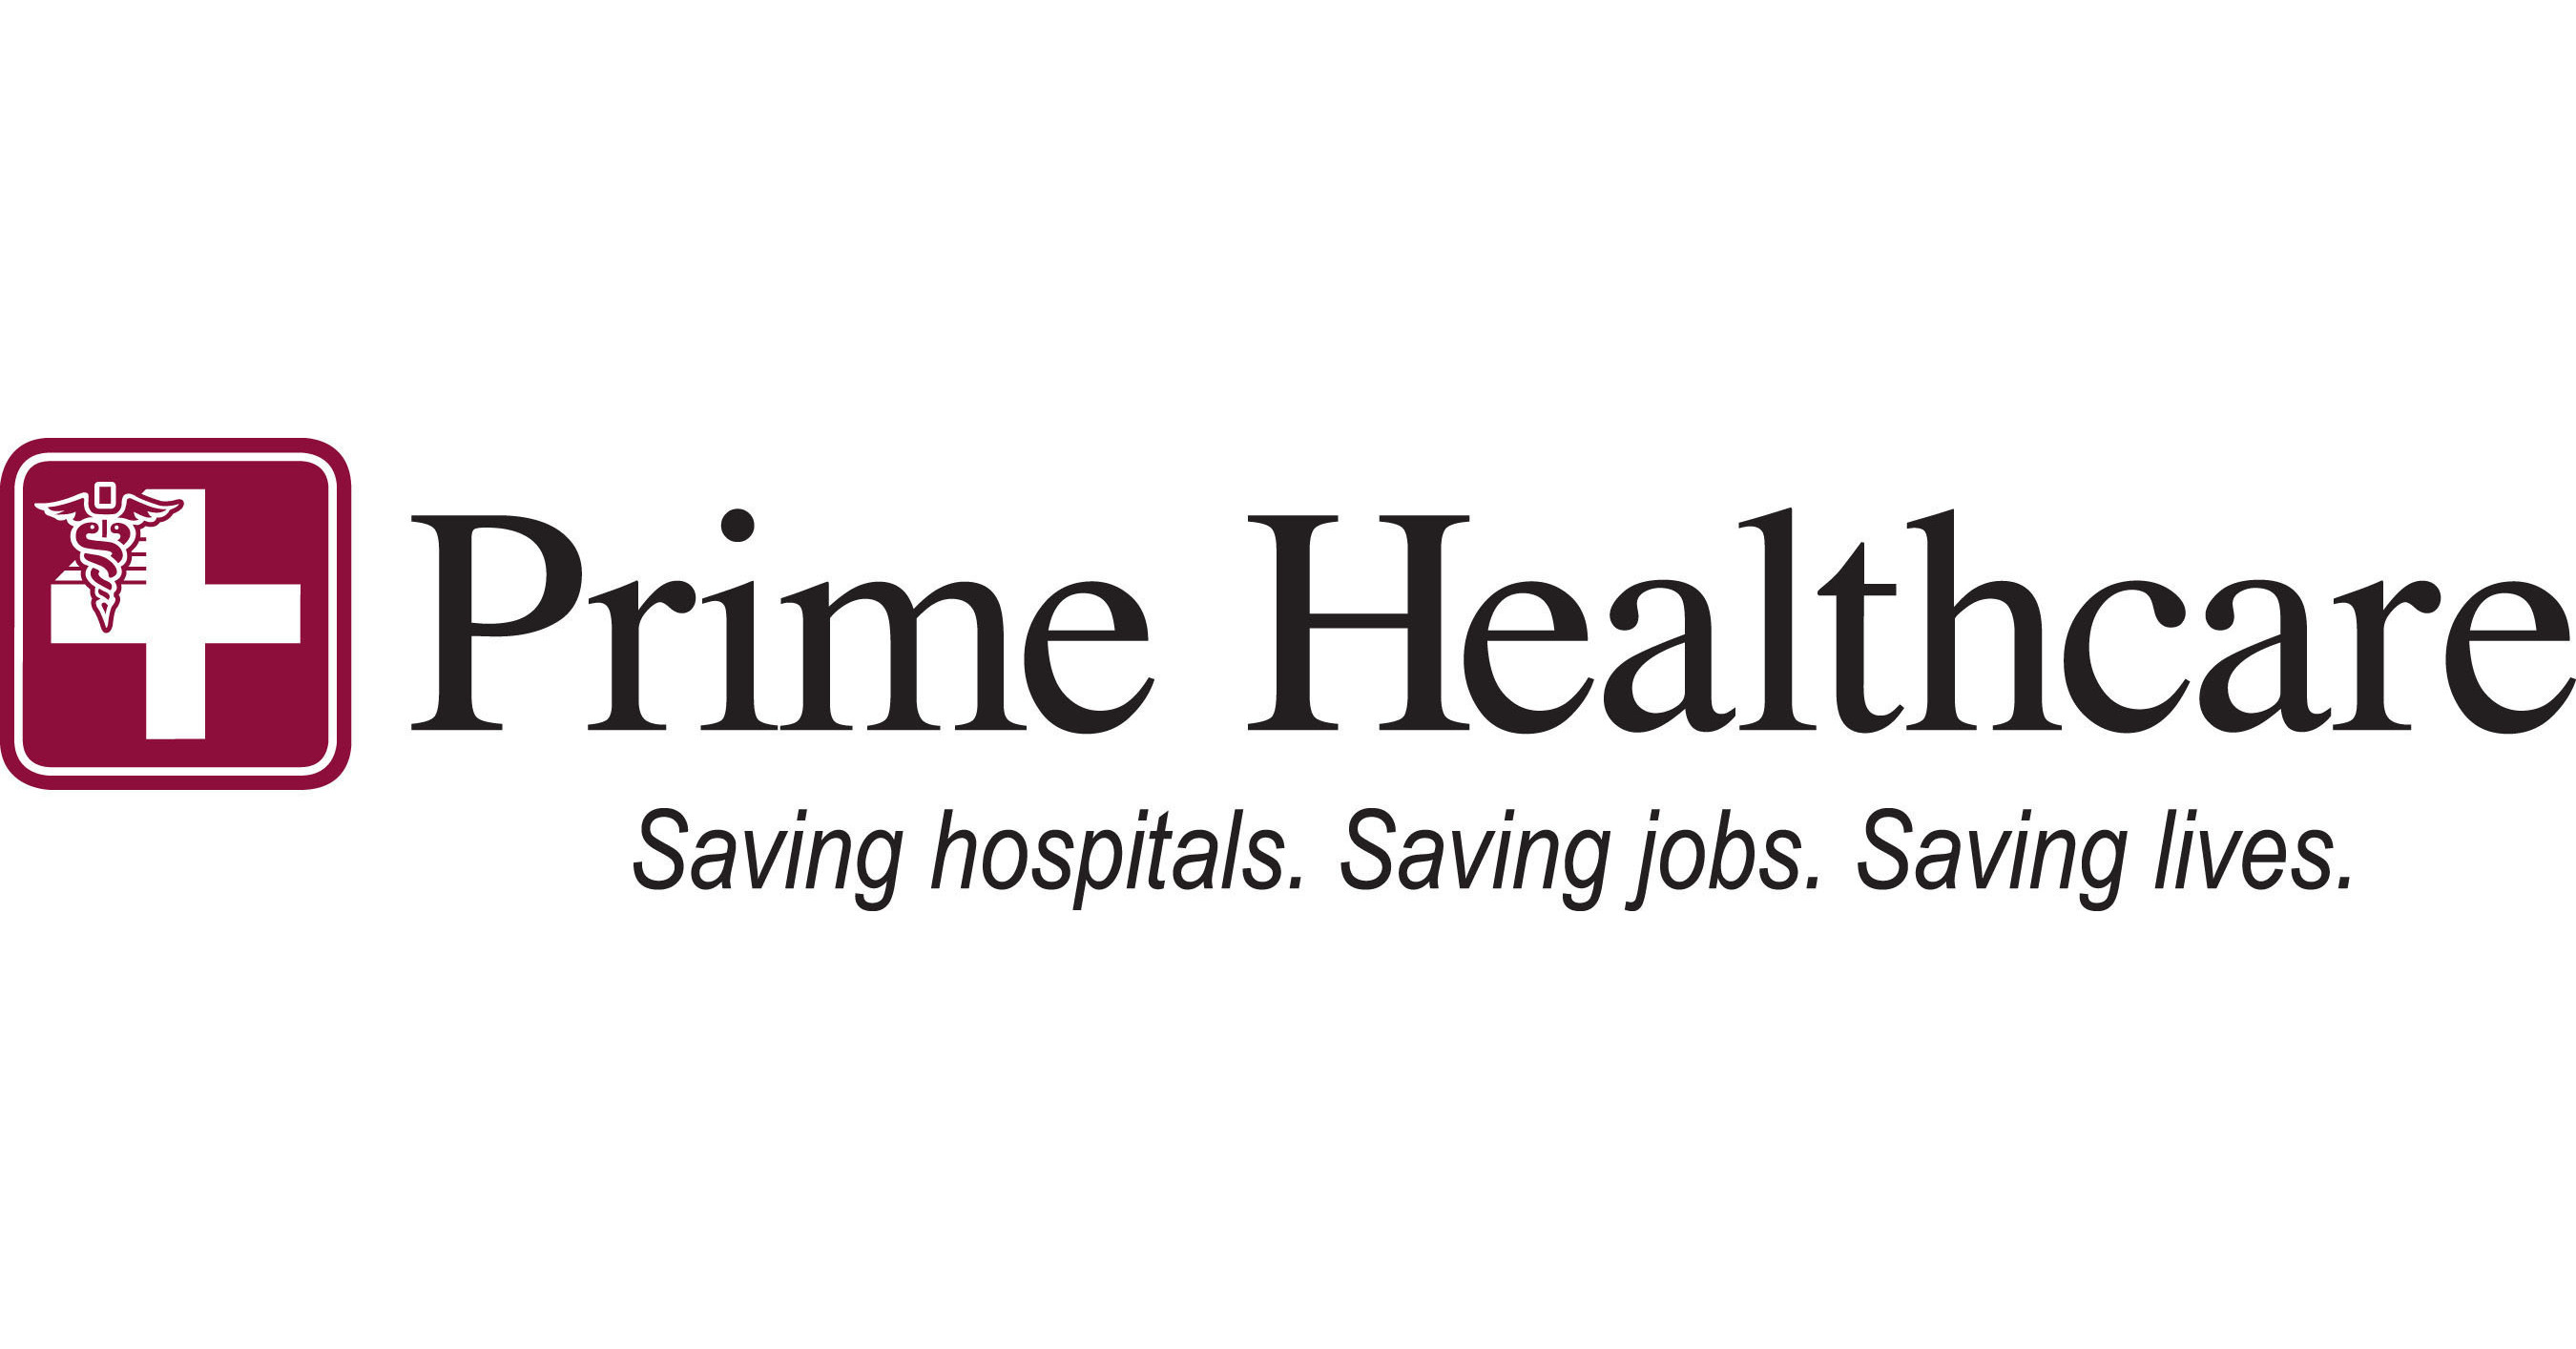 Prime Healthcare Hospitals Recognized Nationally by Healthgrades